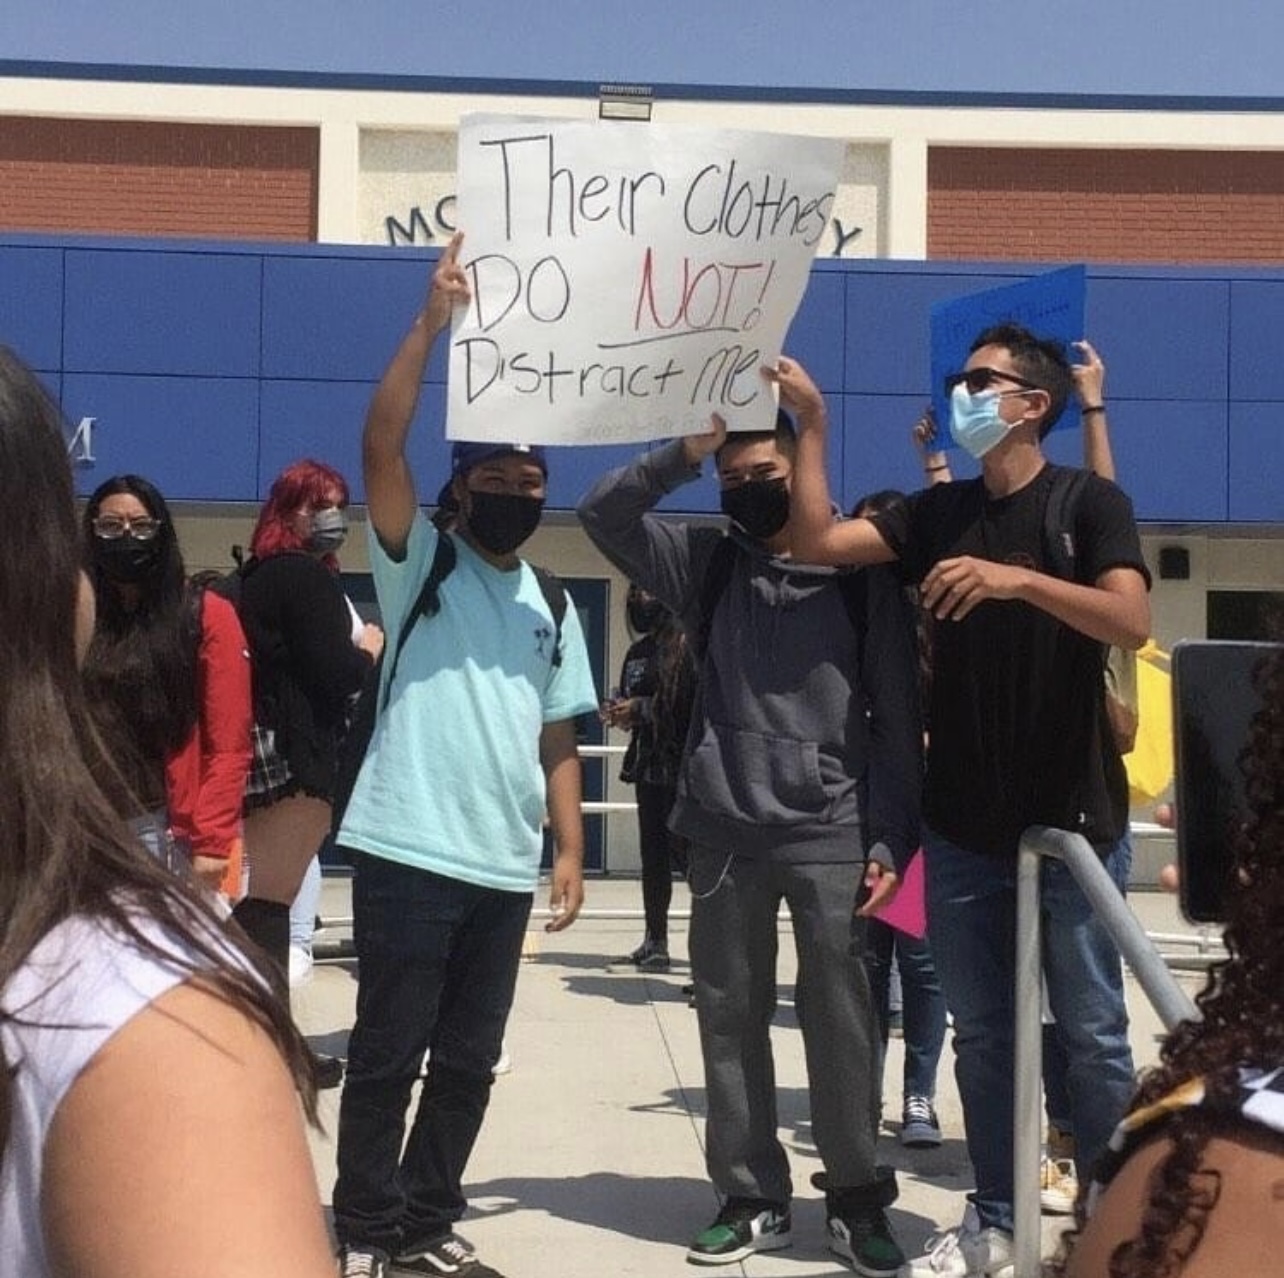 Pitman students decry dress code with planned protest - Turlock Journal